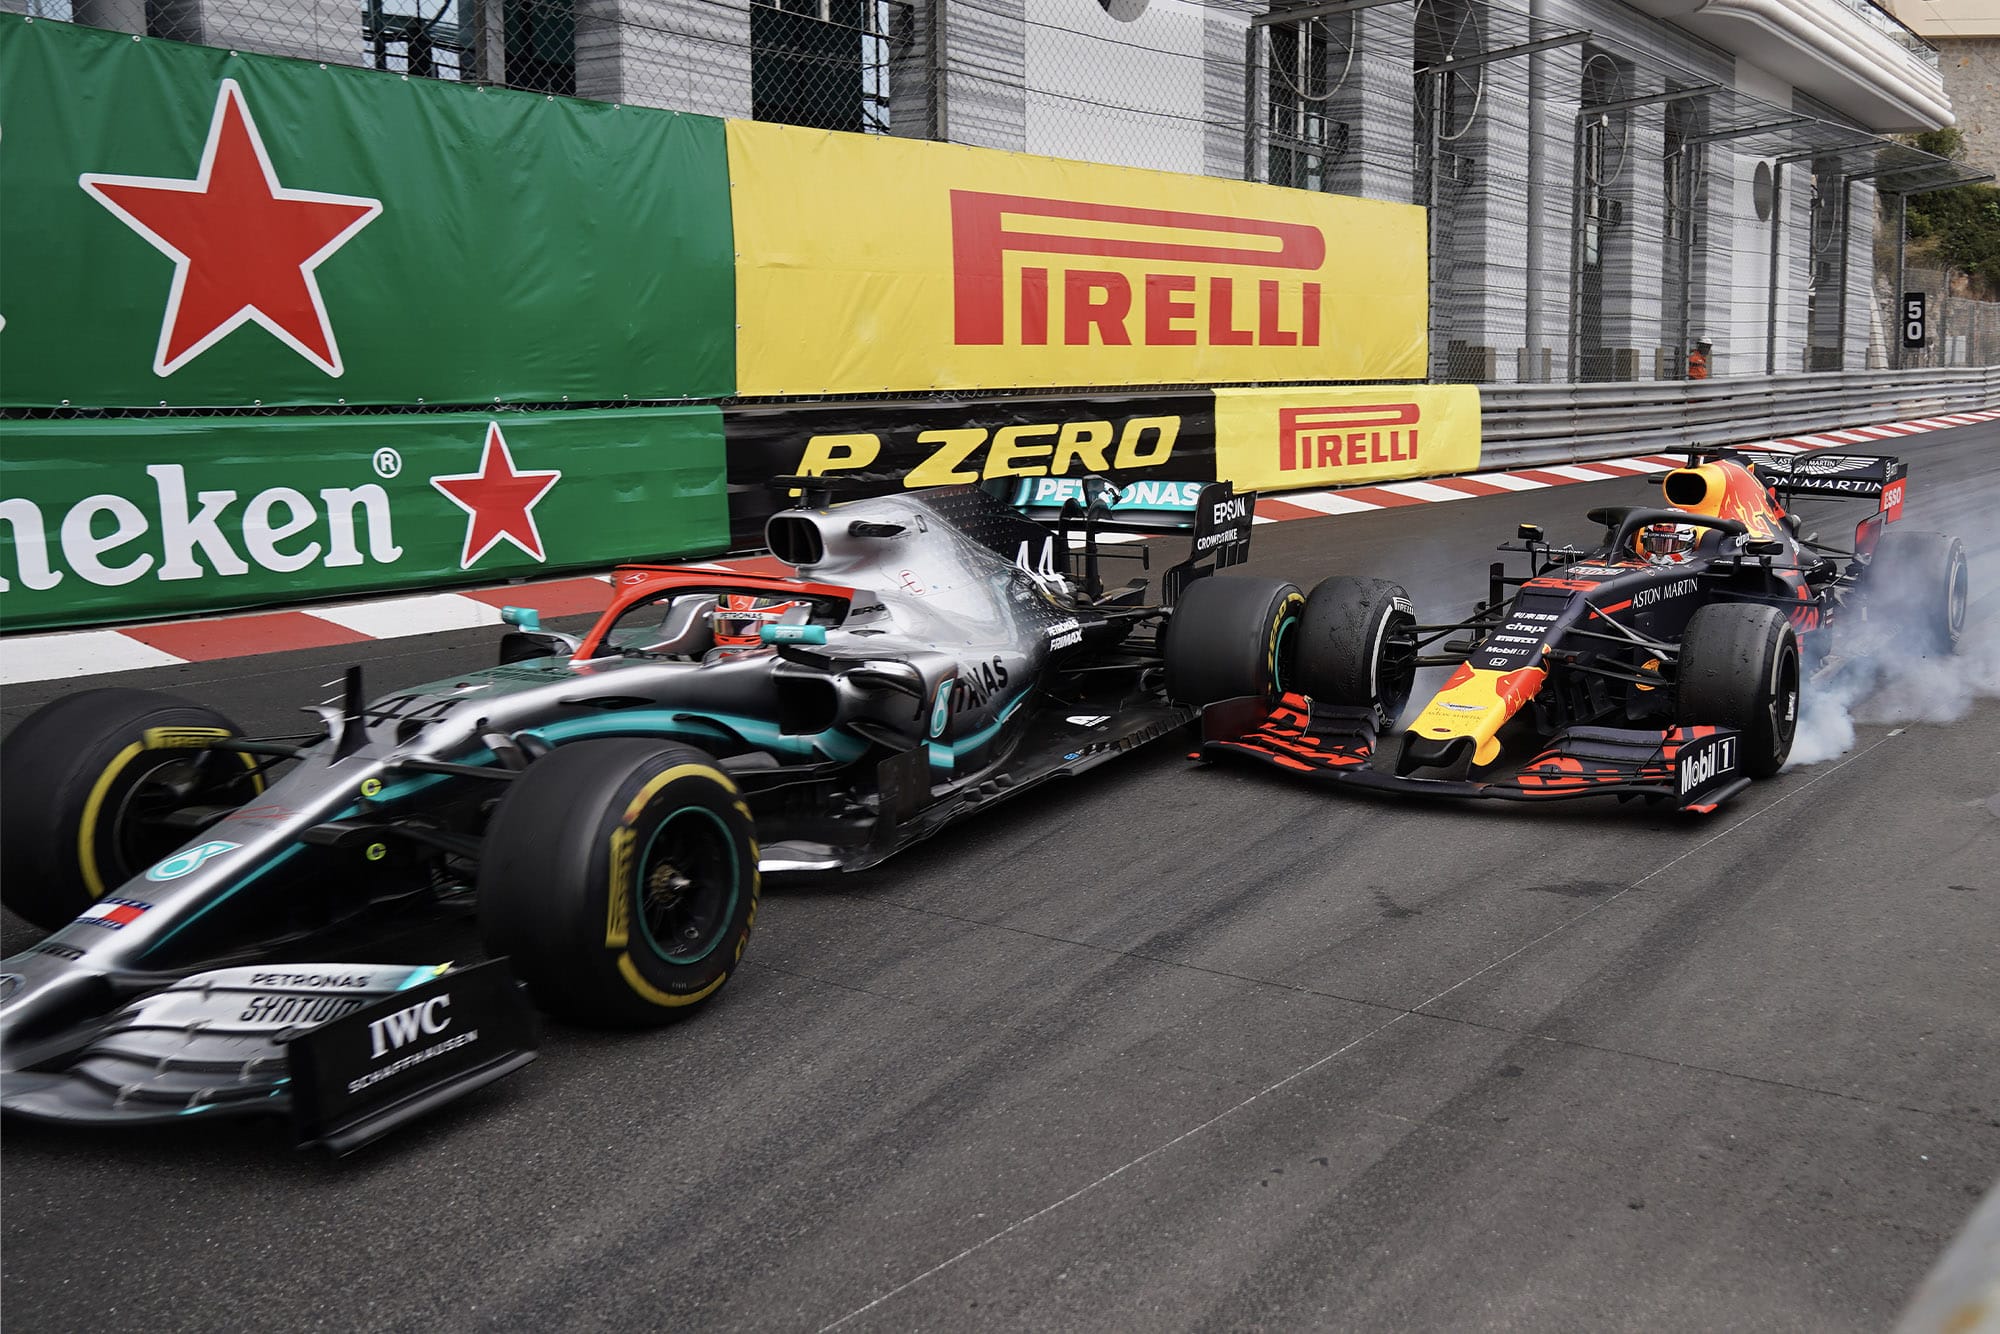 Lewis Hamilton and Max Verstappen make contact at the Nouvelle Chicane during the 2019 Monaco Grand Prix